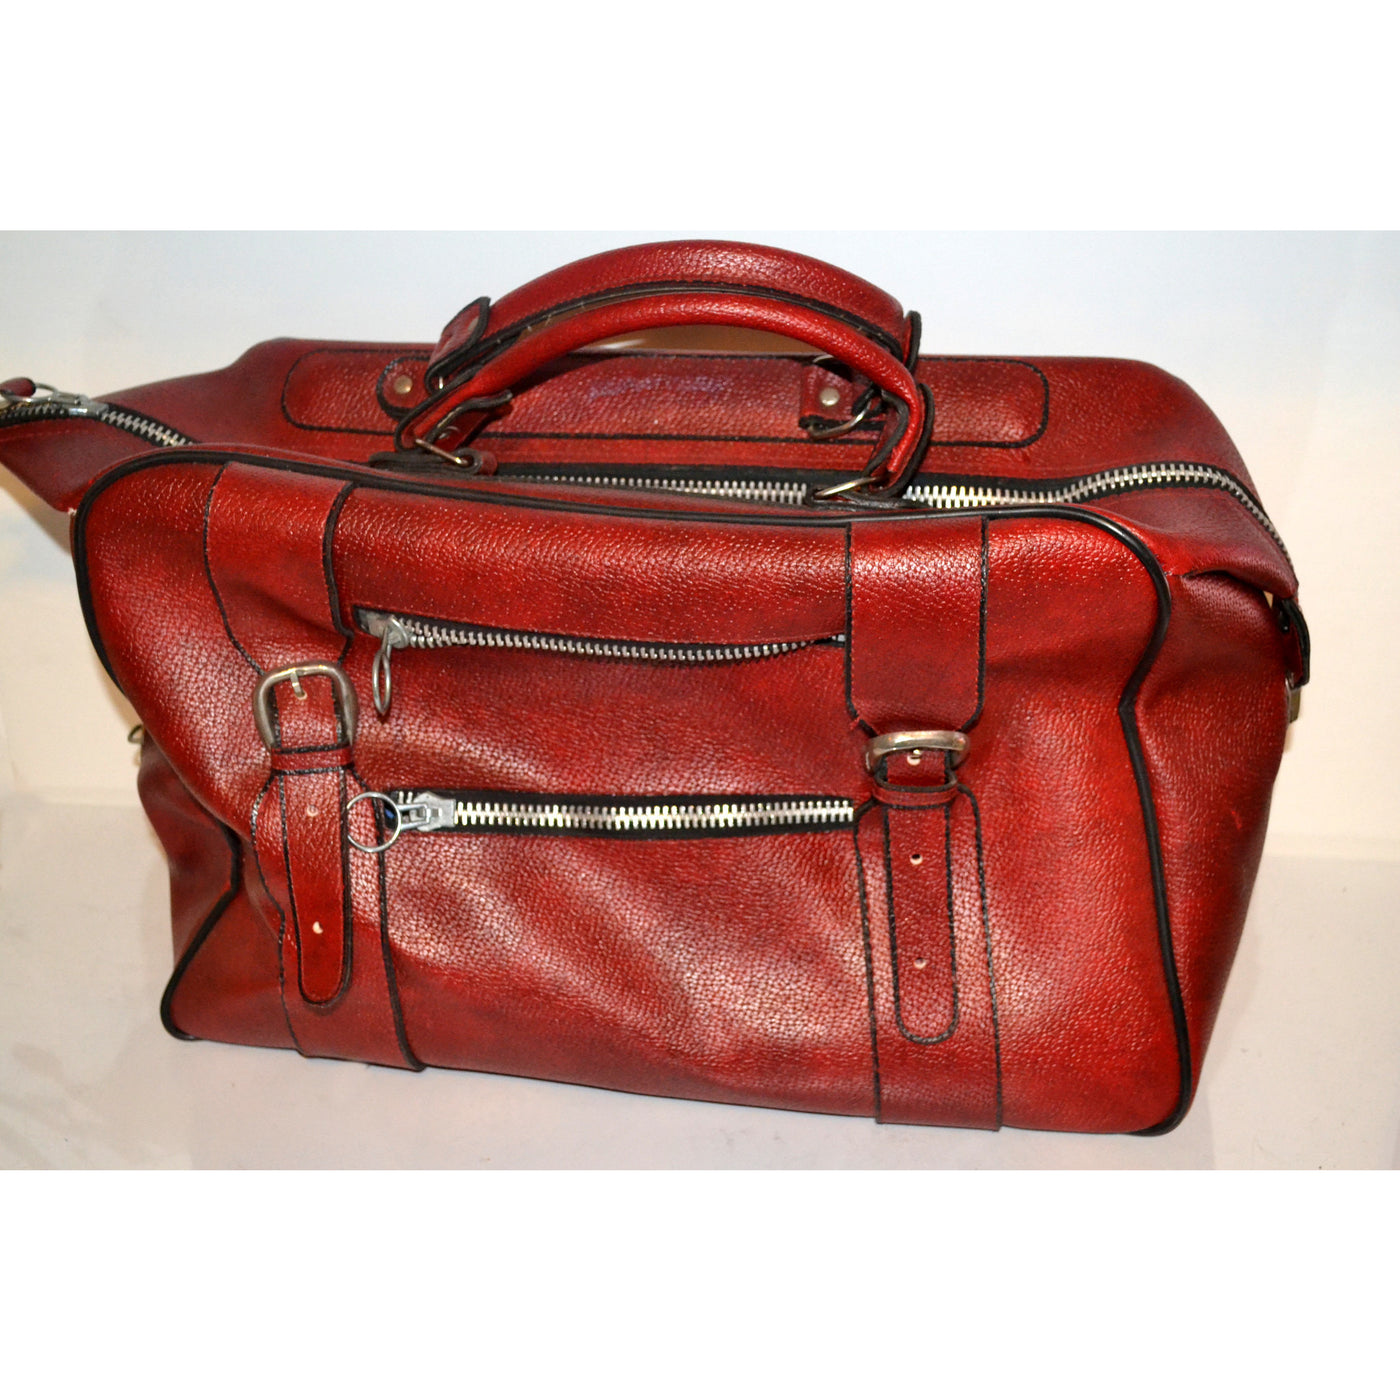 Vintage Red Faux Leather Zipper Travelbag